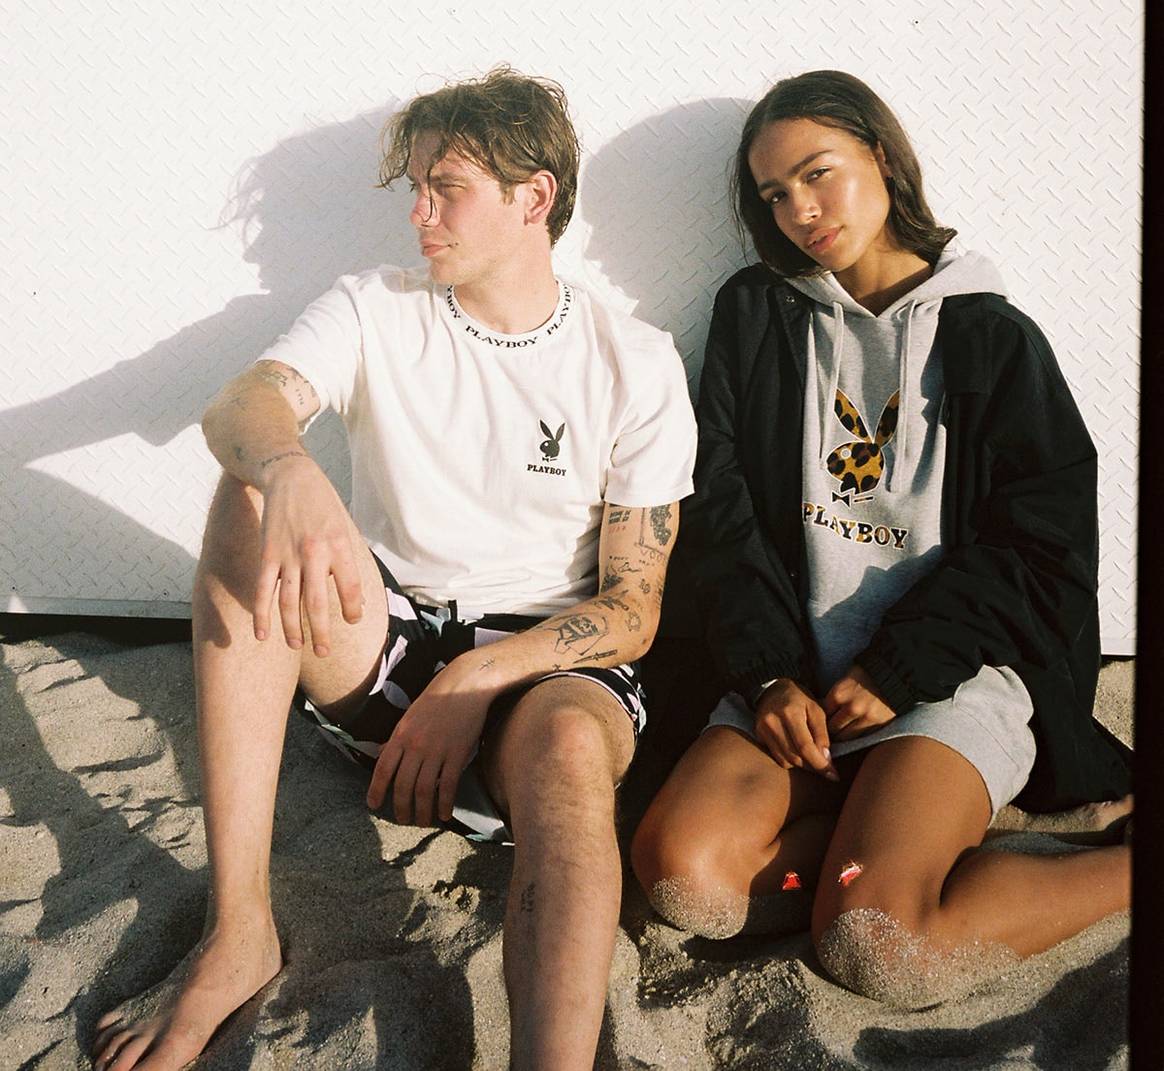 Playboy launches second drop in collaboration with Pacsun for spring